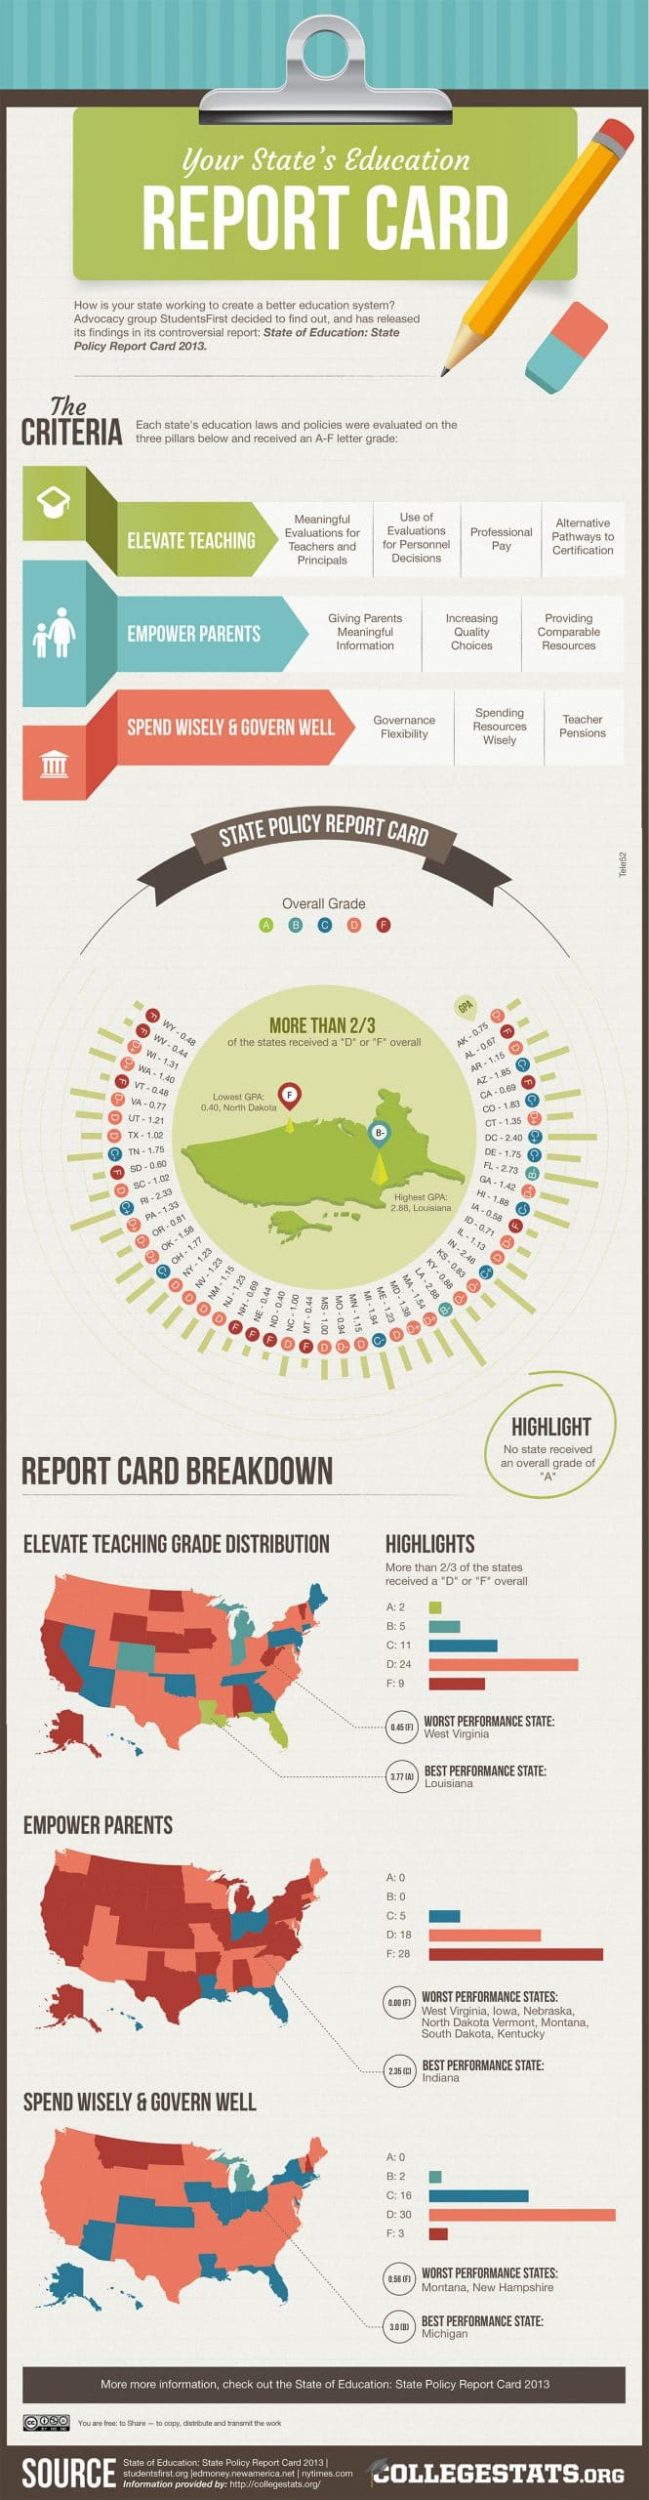 report card info scaled scaled